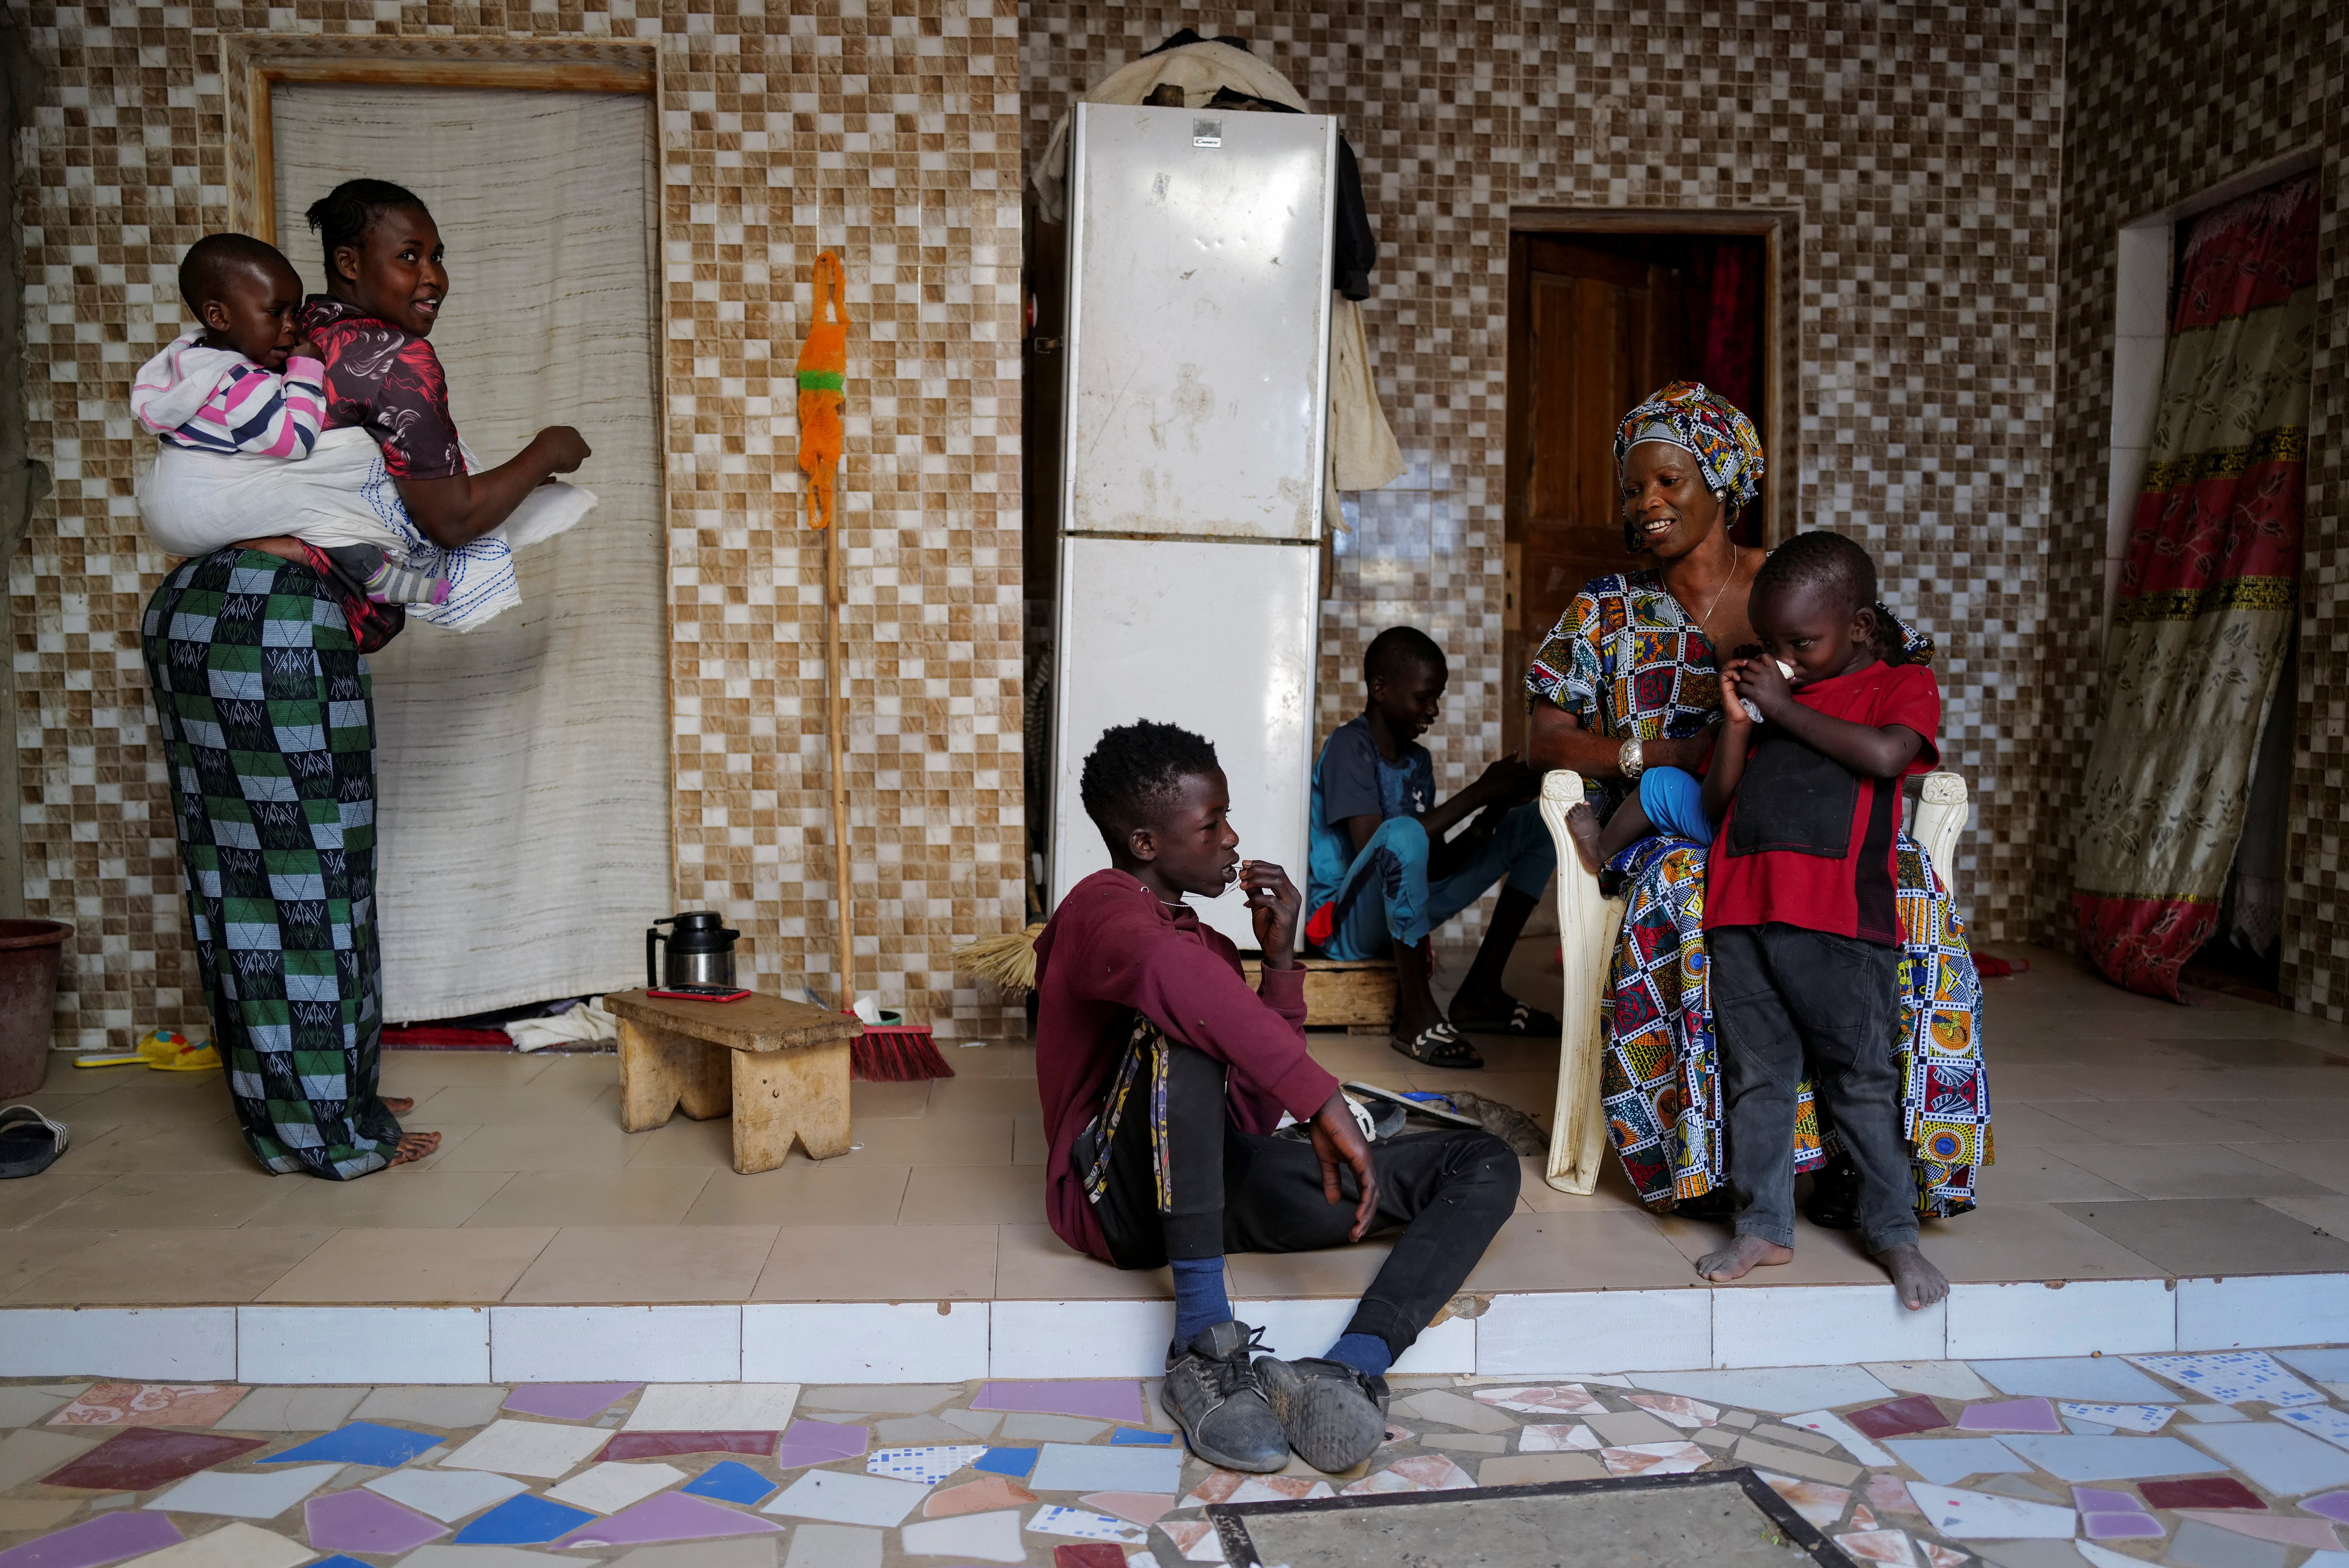 Diop sits next to his mother Ndeye Boye and brothers as his sister, carrying her son, watches on at their home in Niaga